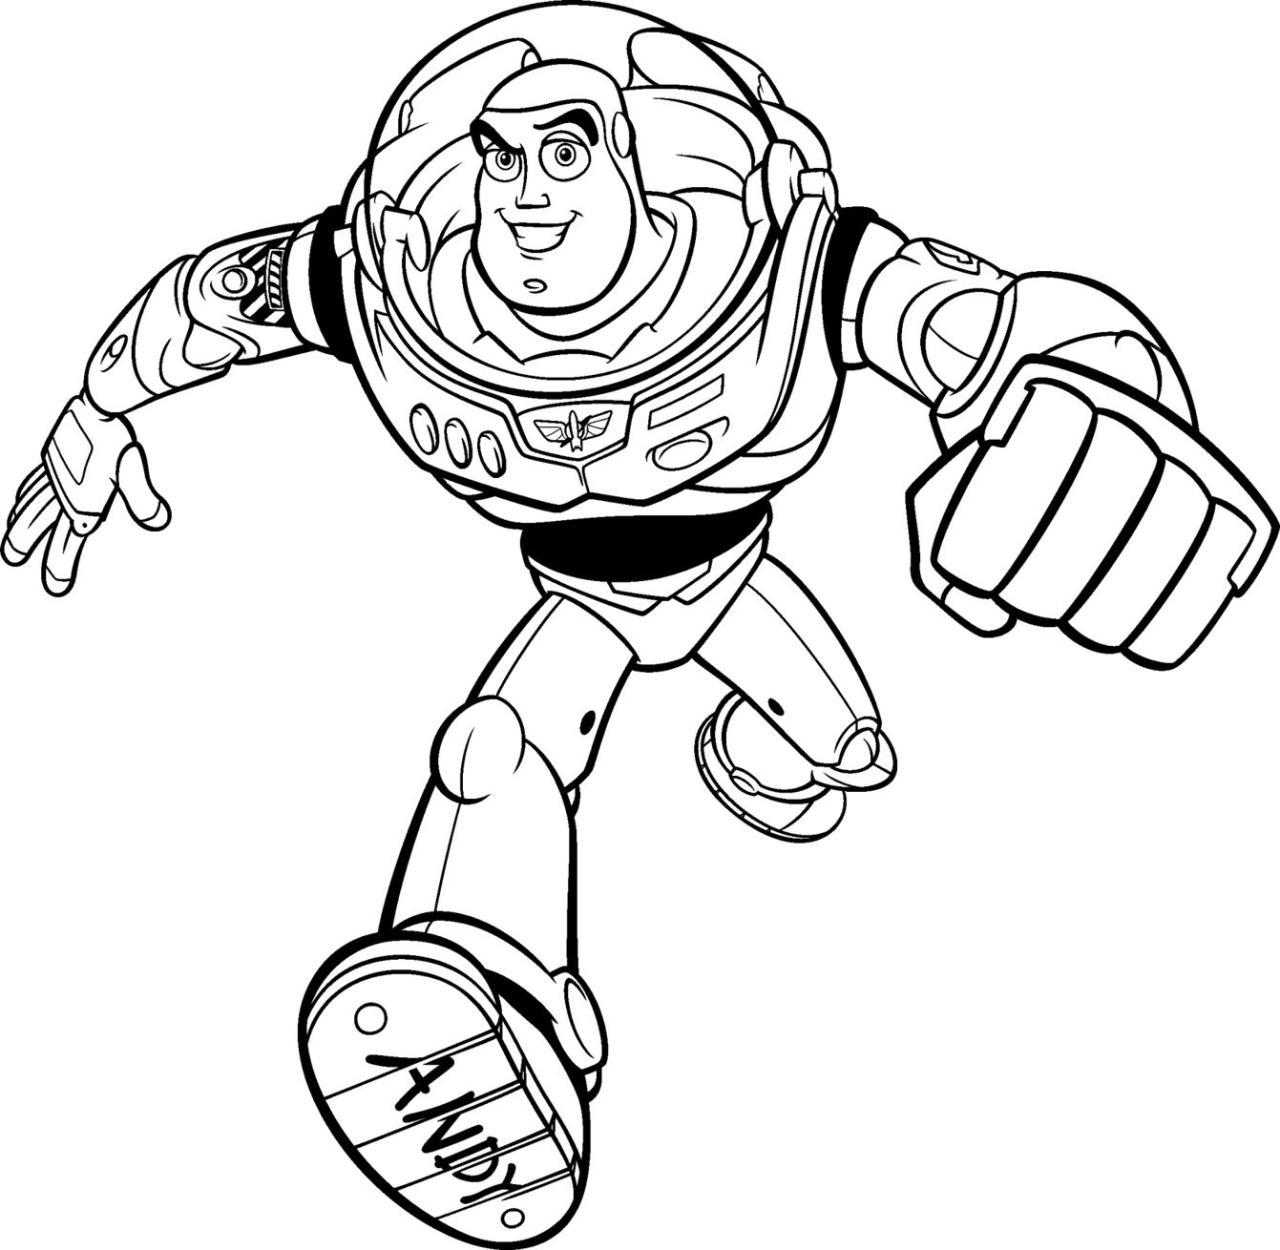 Toy Story Colouring Book